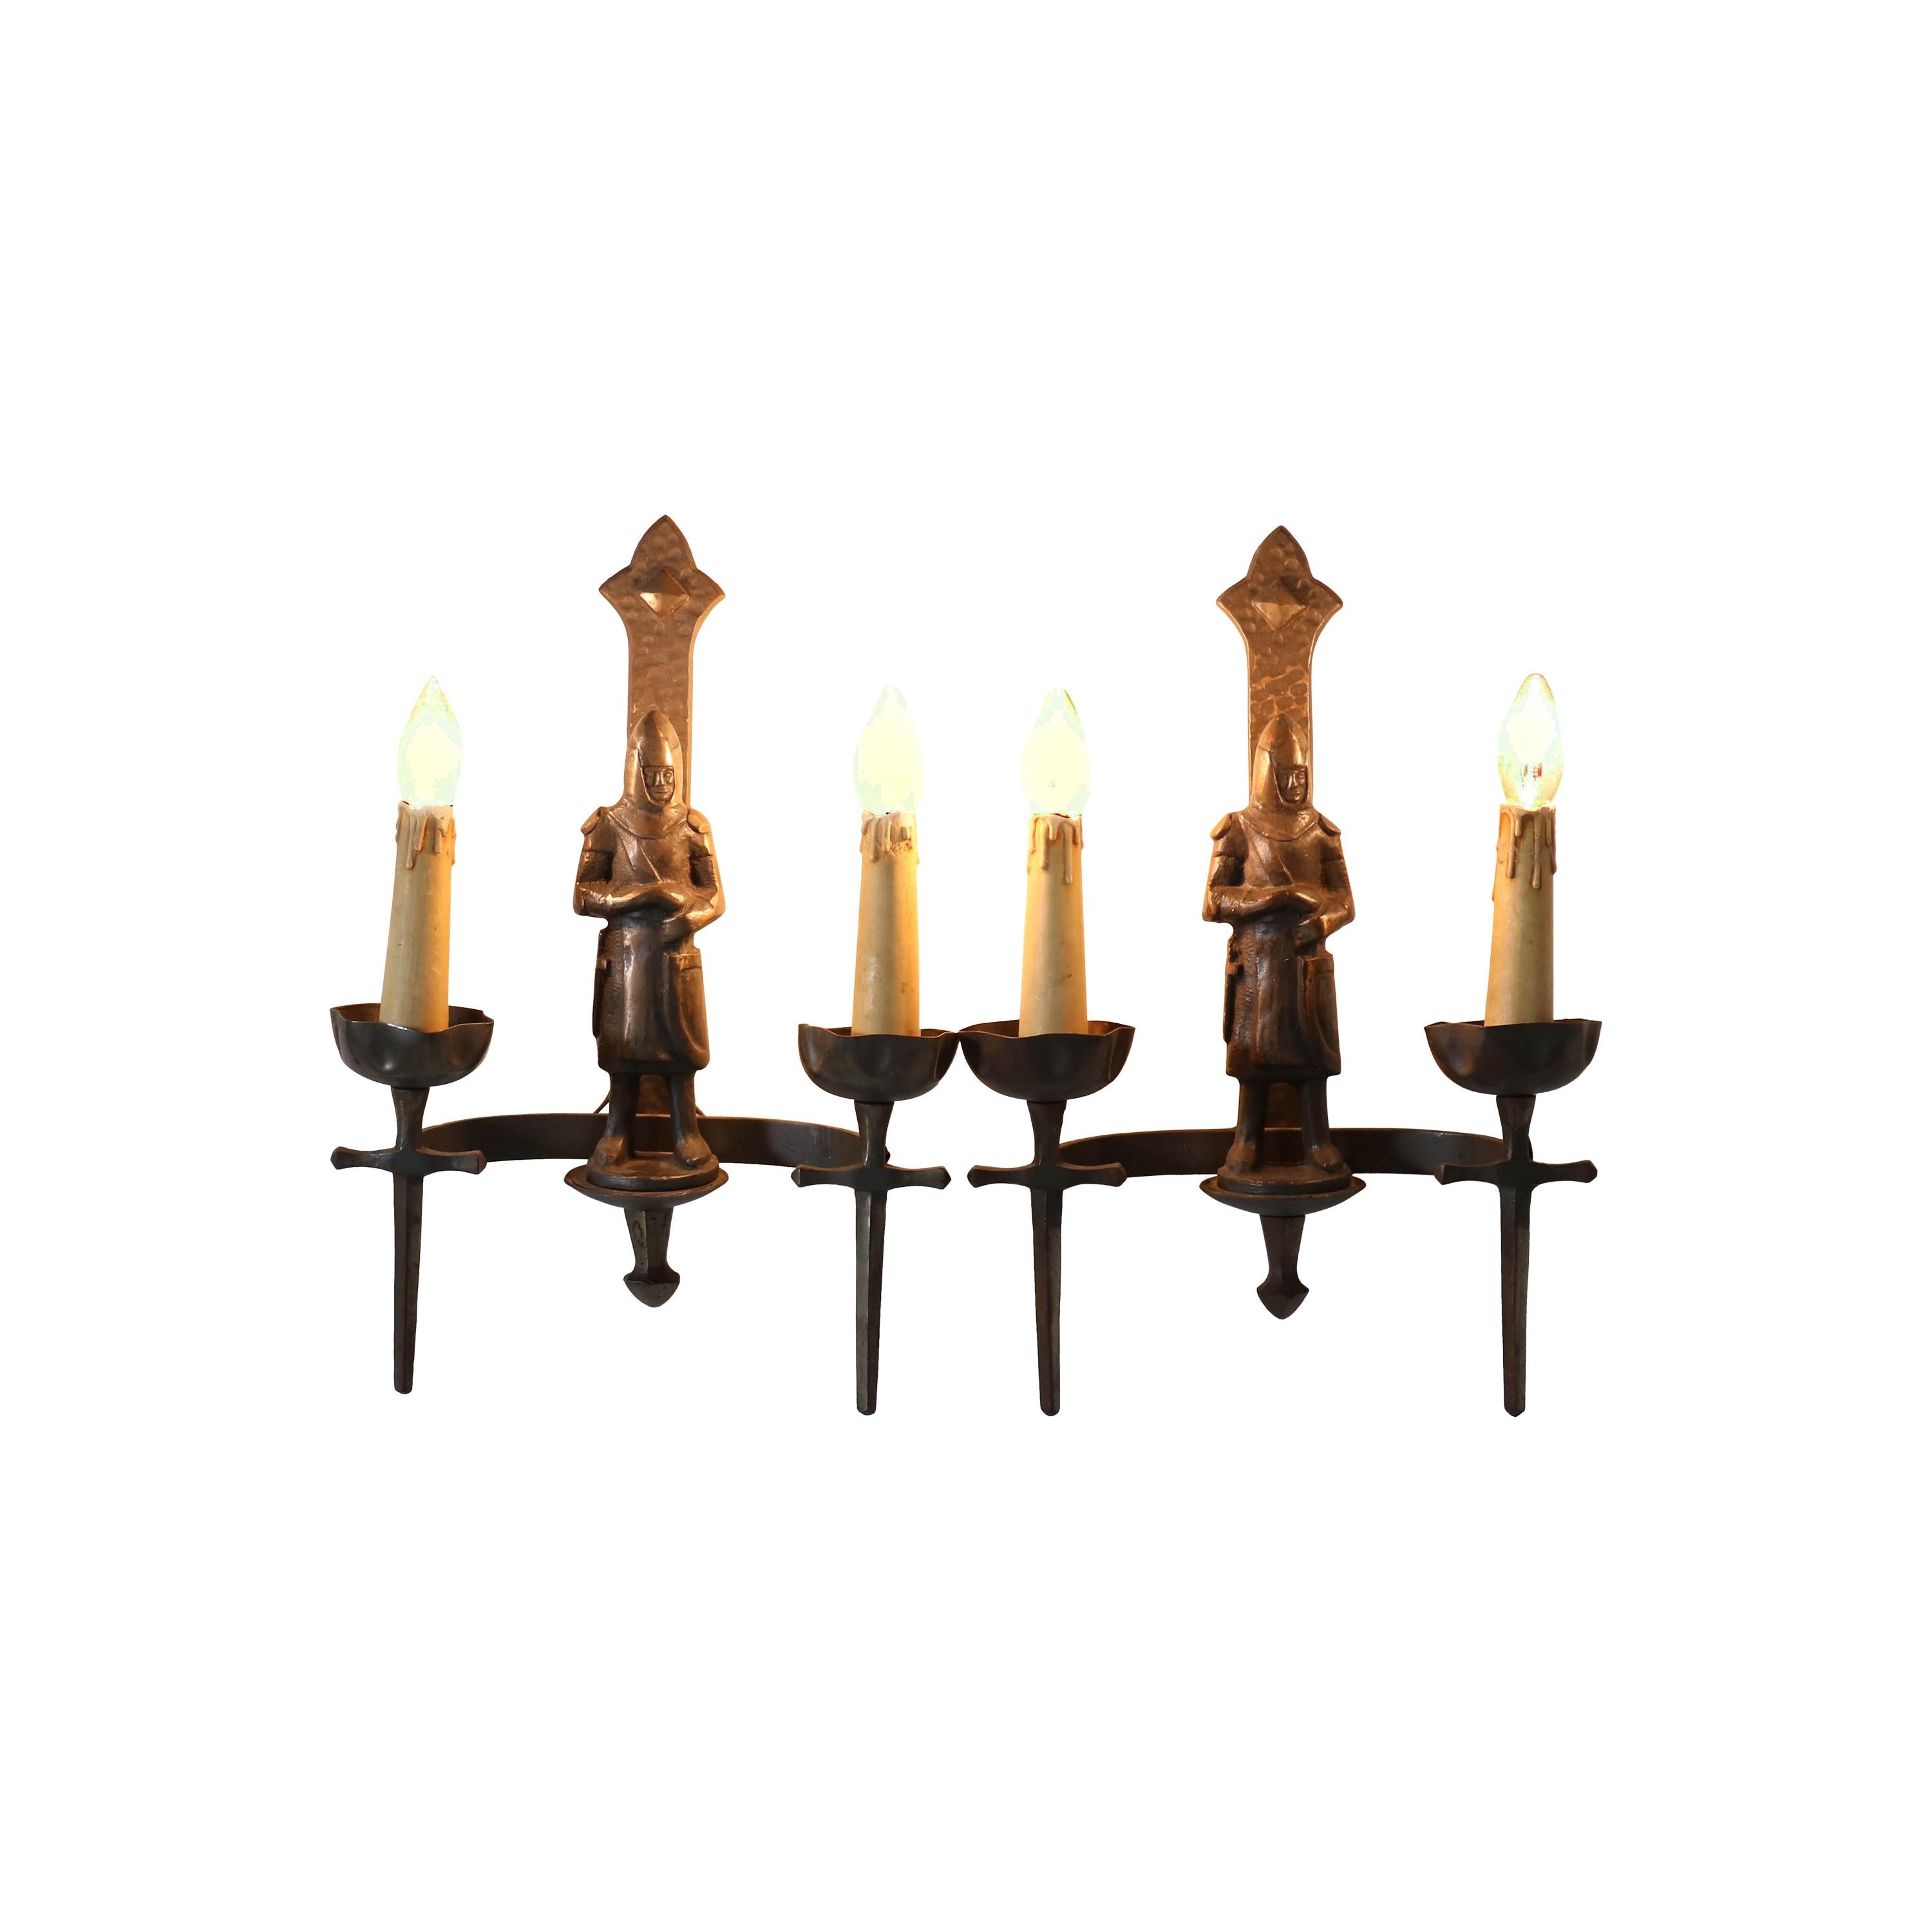 French Gothic Revival Bronzed Knights with Swords Wall Lights or Sconses